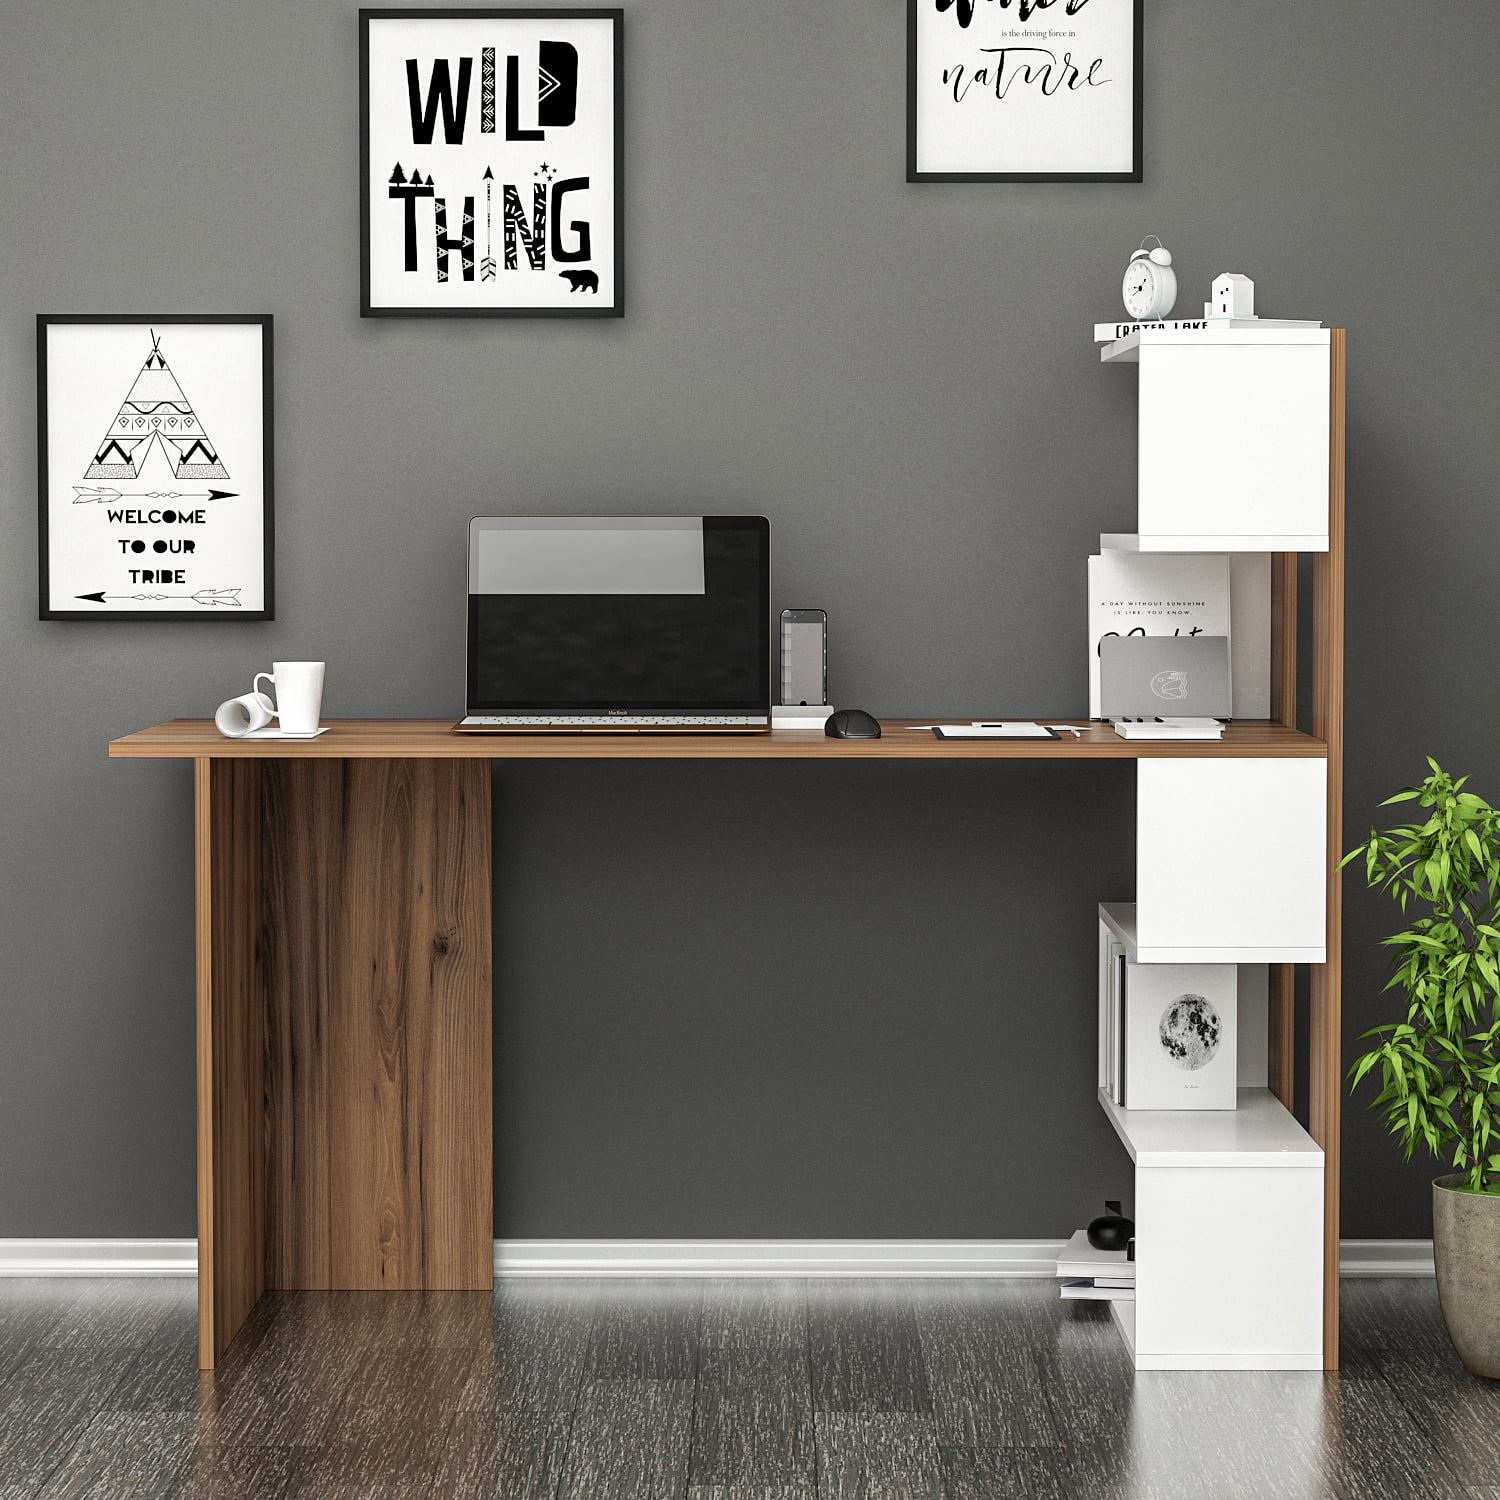  HM&DX Home Office Computer Desk with Hutch,Wood Writing Desk  Study Desk with Drawers,Modern Furniture Wooden Desk with Open Storage  Cubby,Study Table Computer Desk Makeup Workstation : Home & Kitchen